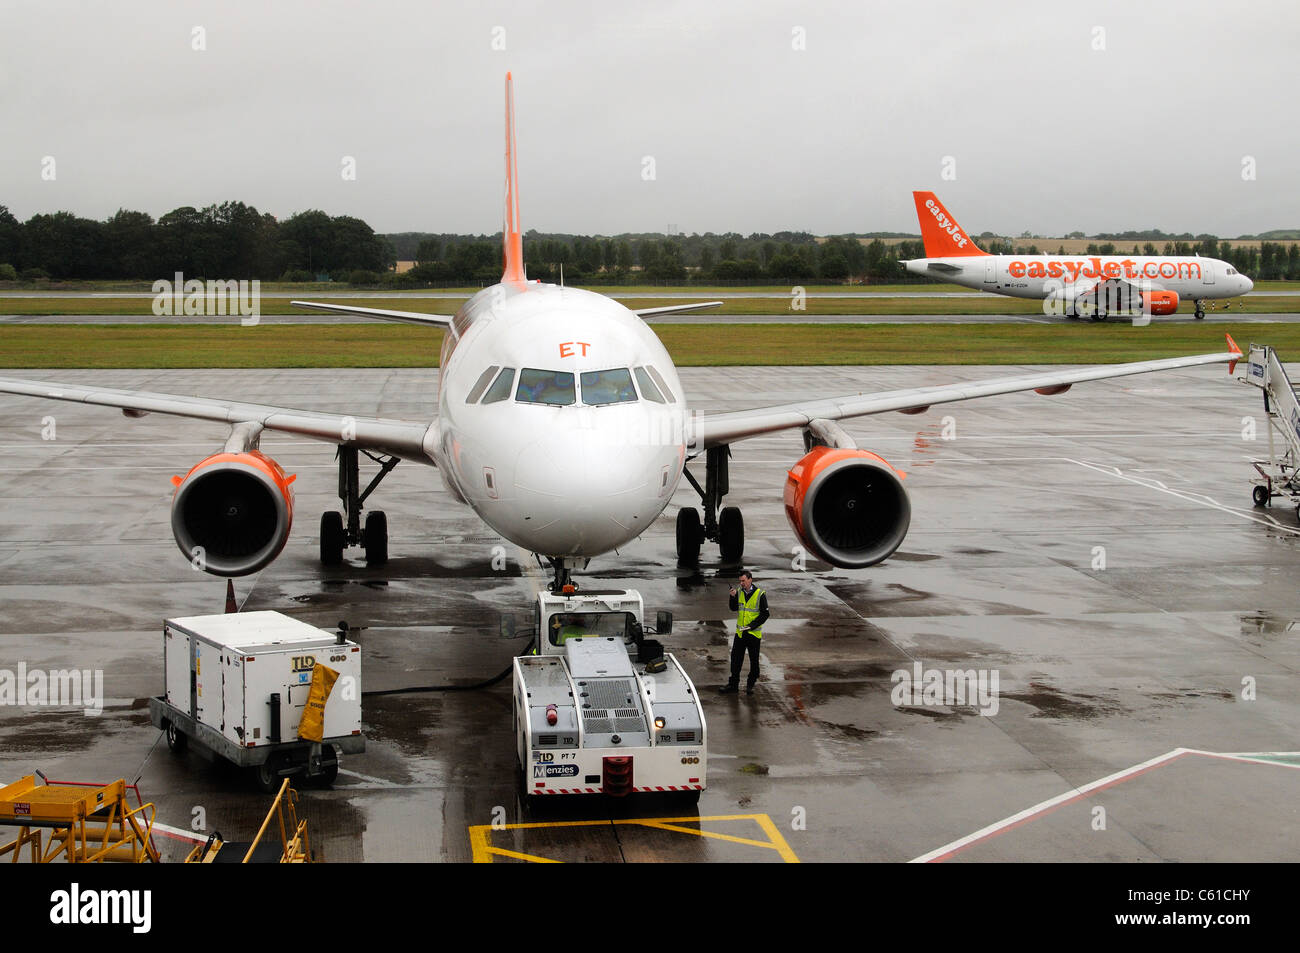 Ground support service using a pushback tractor to move an Easyjet Airbus onto the taxiway at Edinburgh Airport Scotland Stock Photo